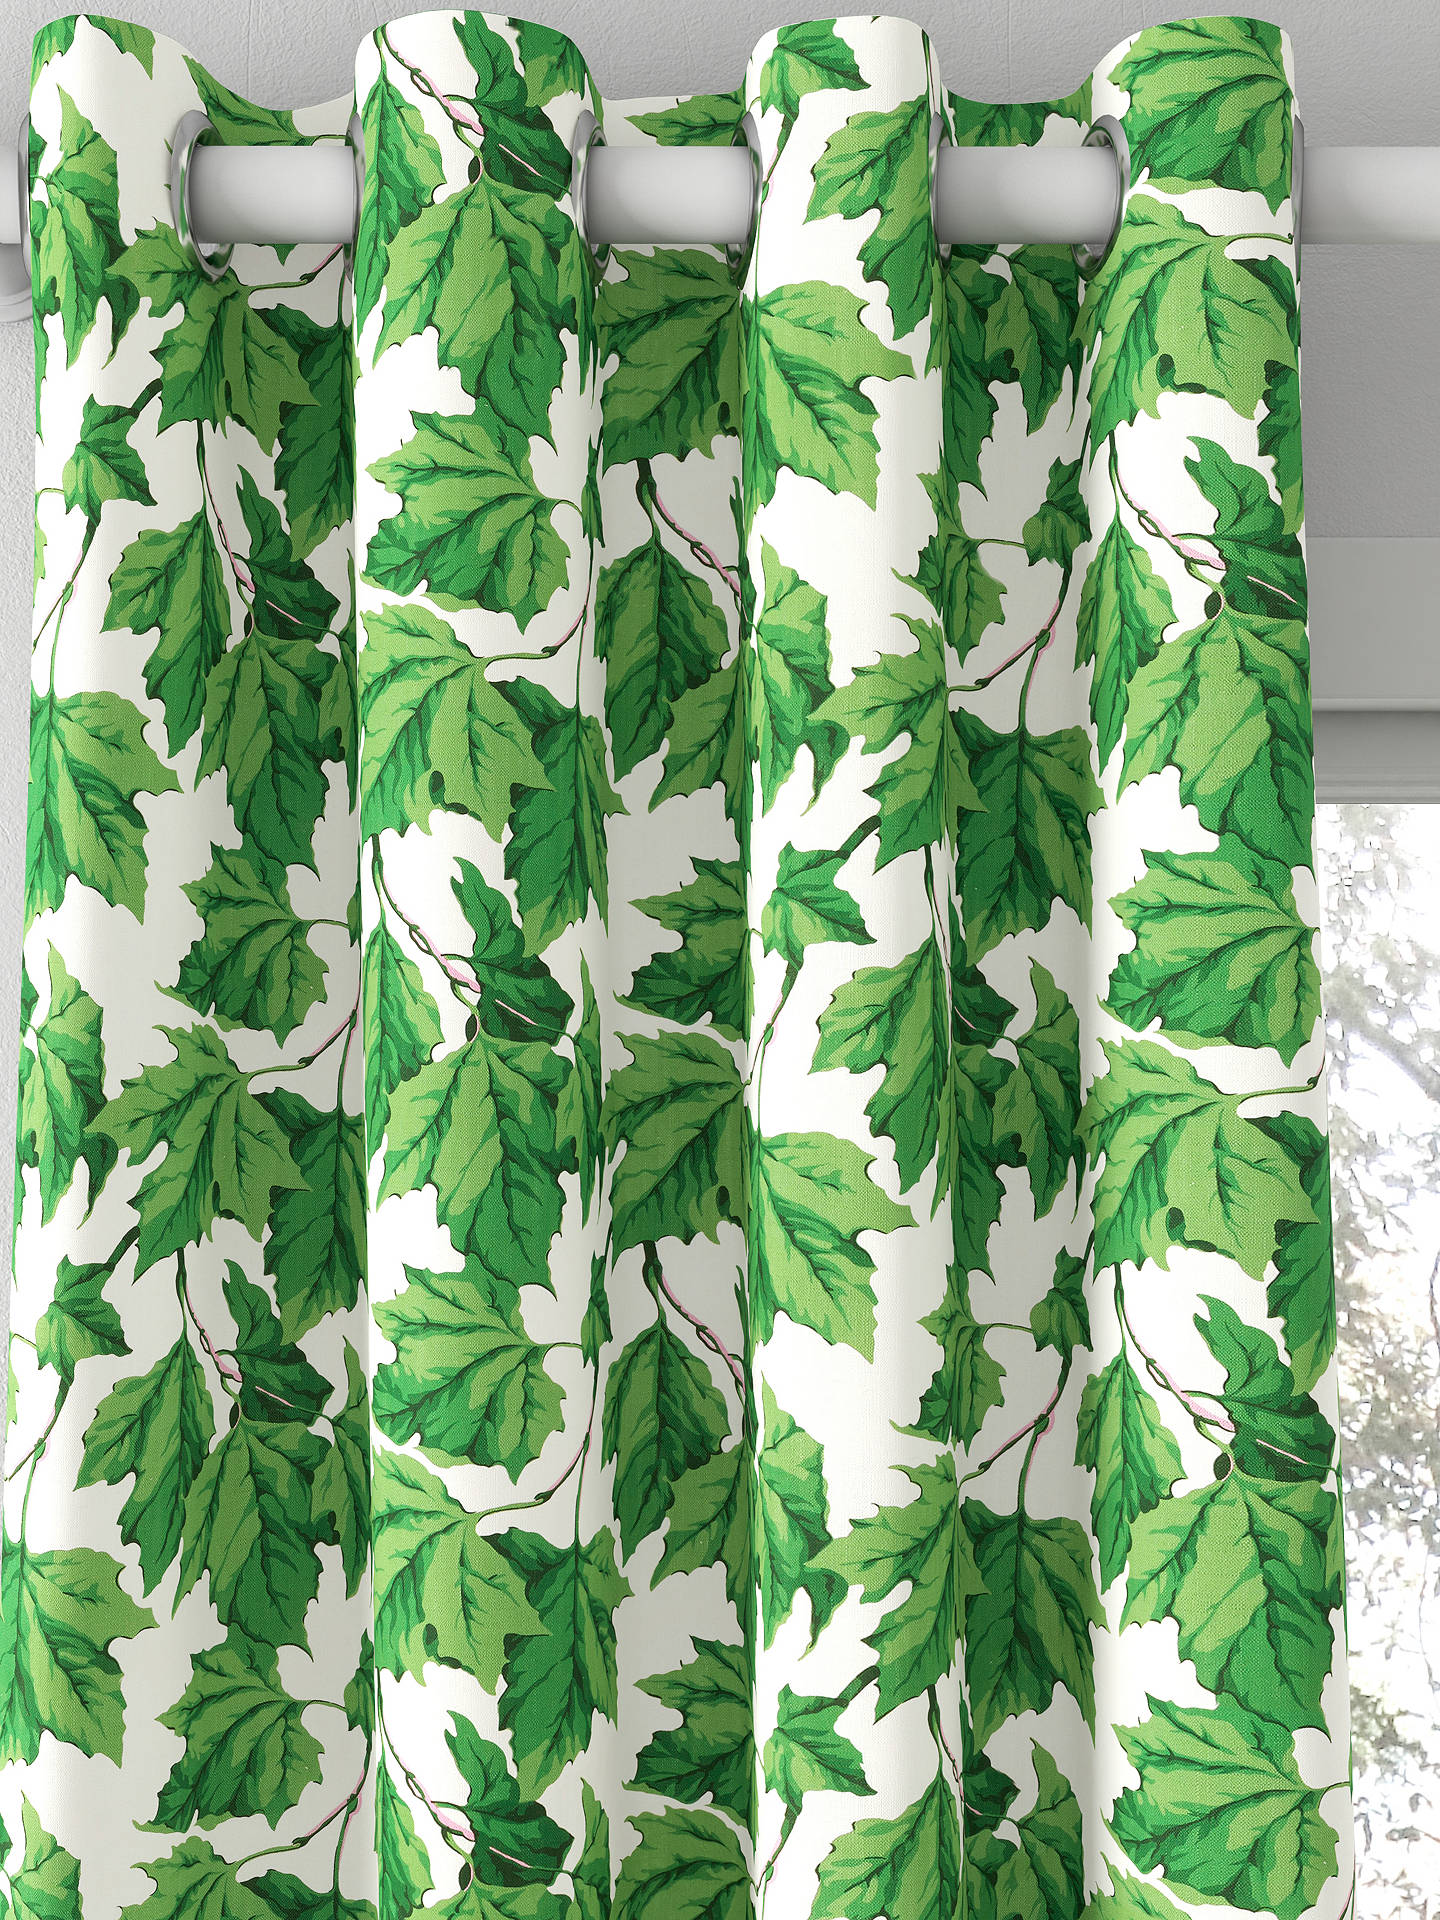 Harlequin x Sophie Robinson Dappled Leaf Made to Measure Curtains, Emerald